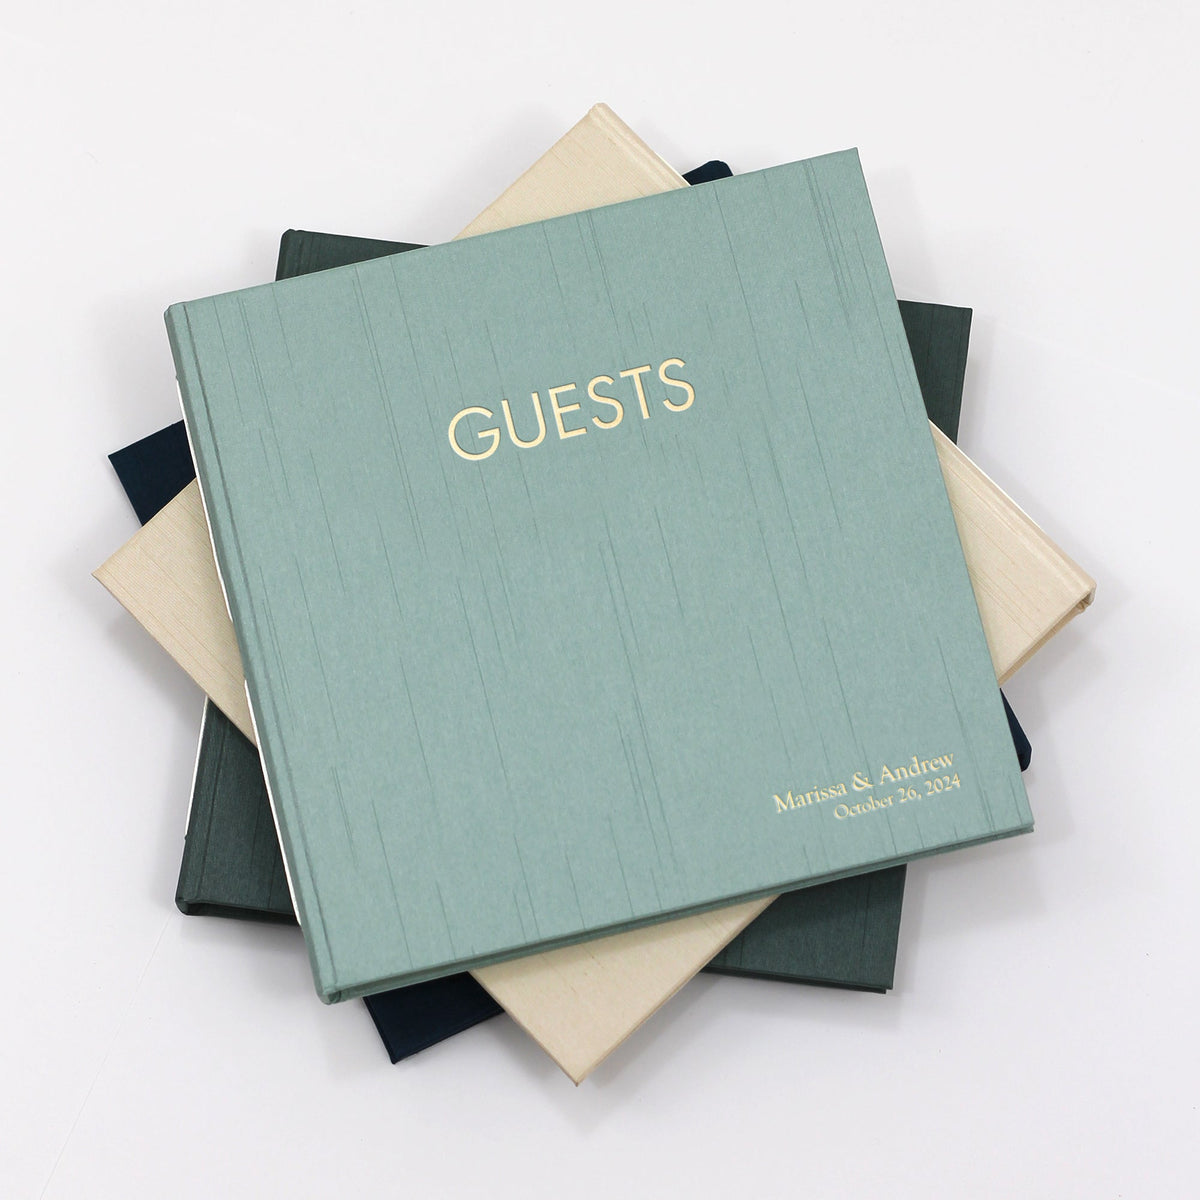 Event Guestbook Embossed with “Guests” | Cover: Pearl Vegan Leather | Available Personalized